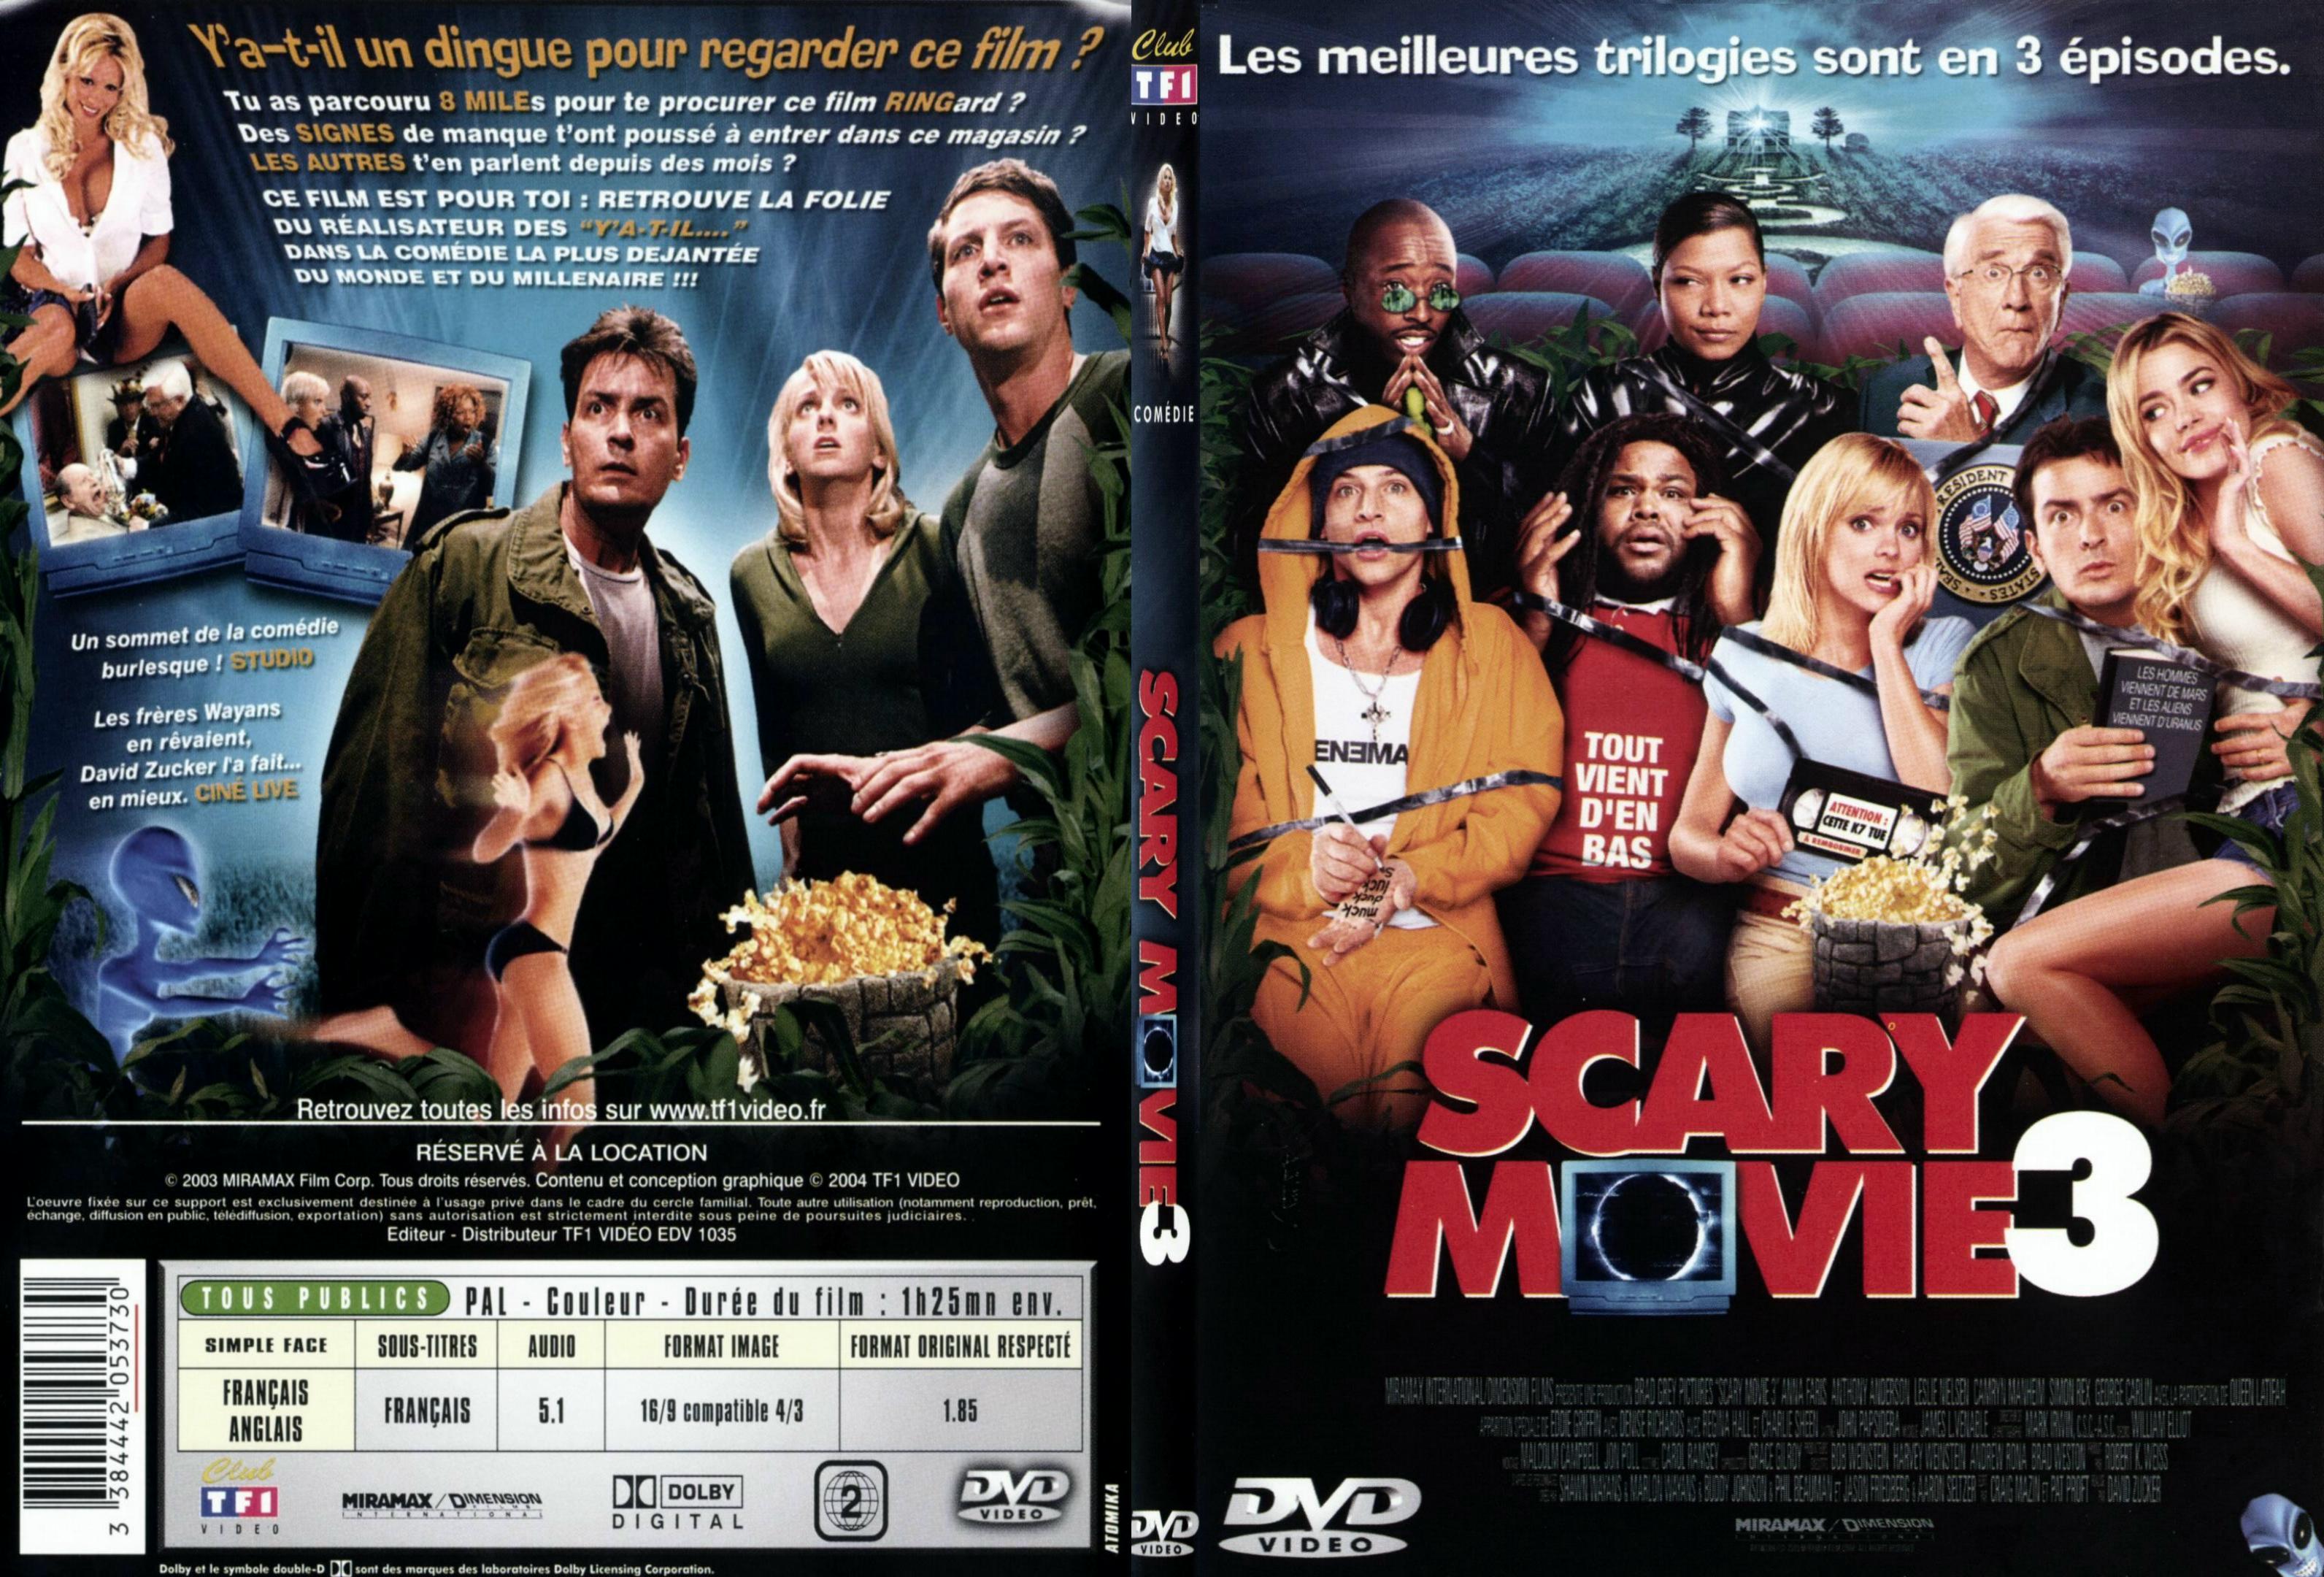 Jaquette DVD Scary movie 3 - SLIM